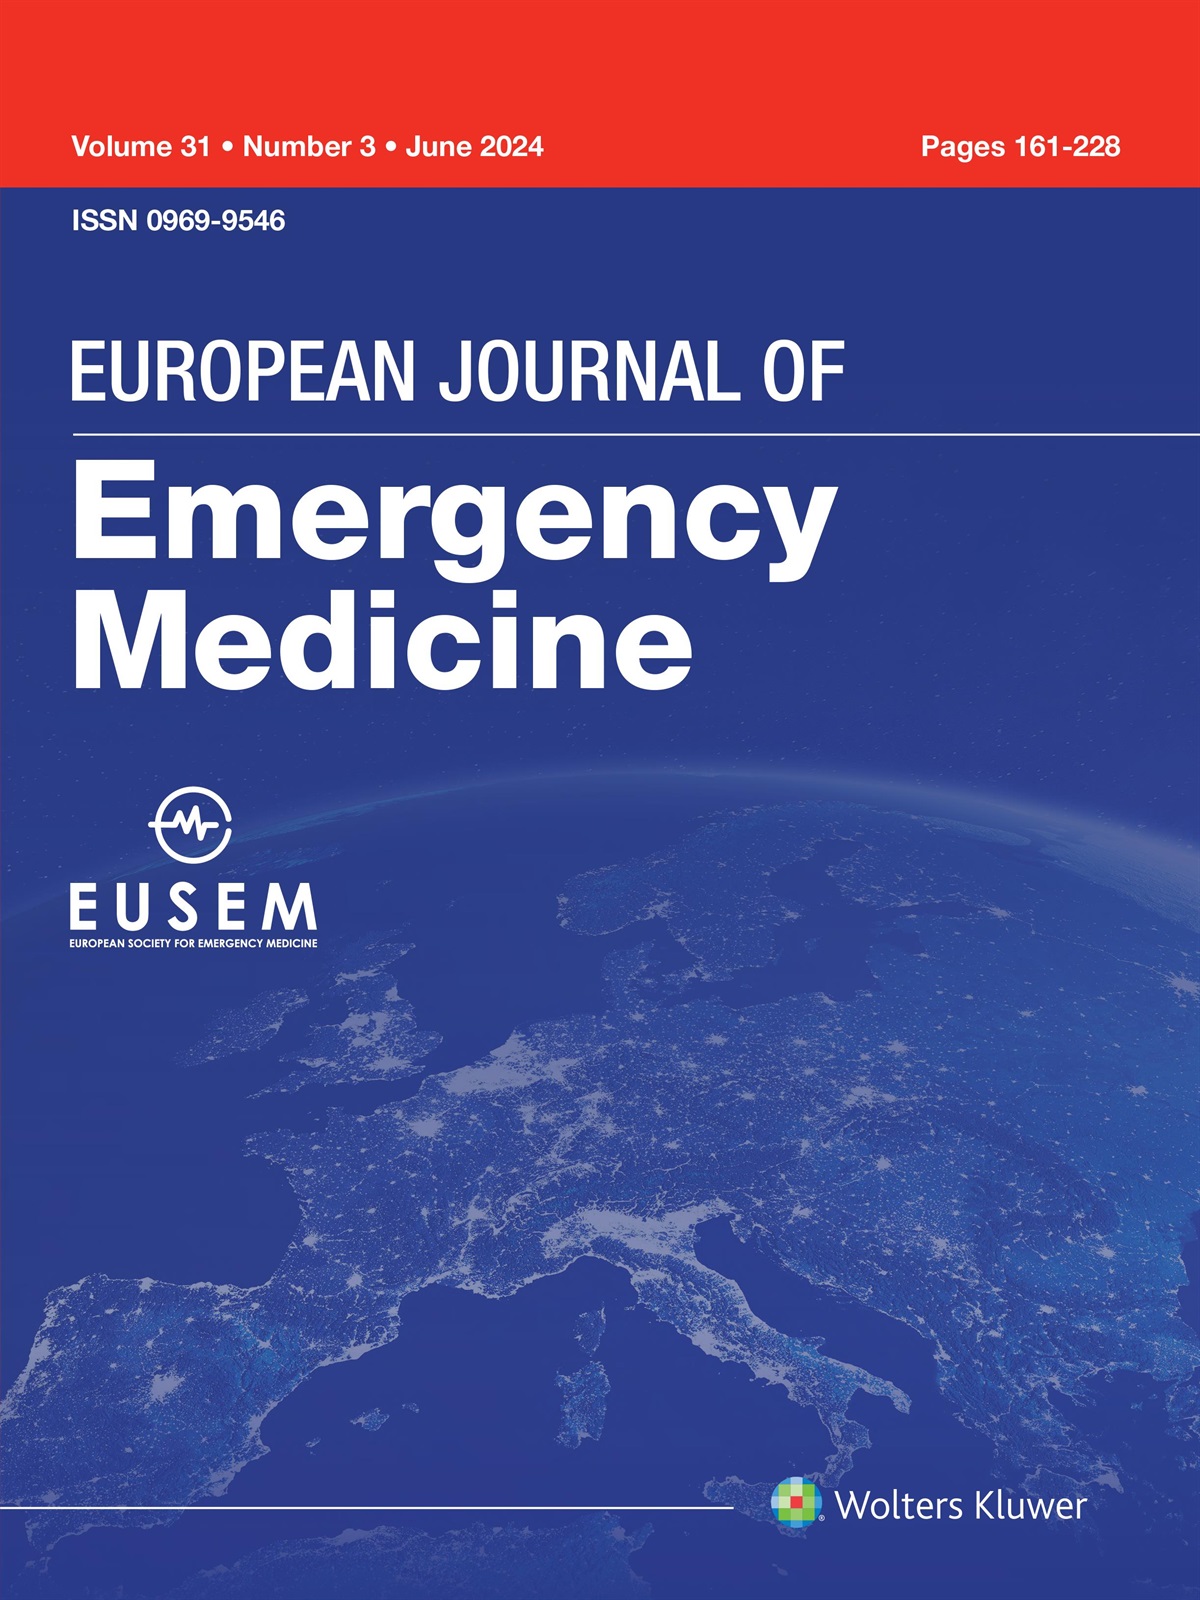 Subcutaneous versus intravenous tramadol: effects on emergency department flow and generalizability